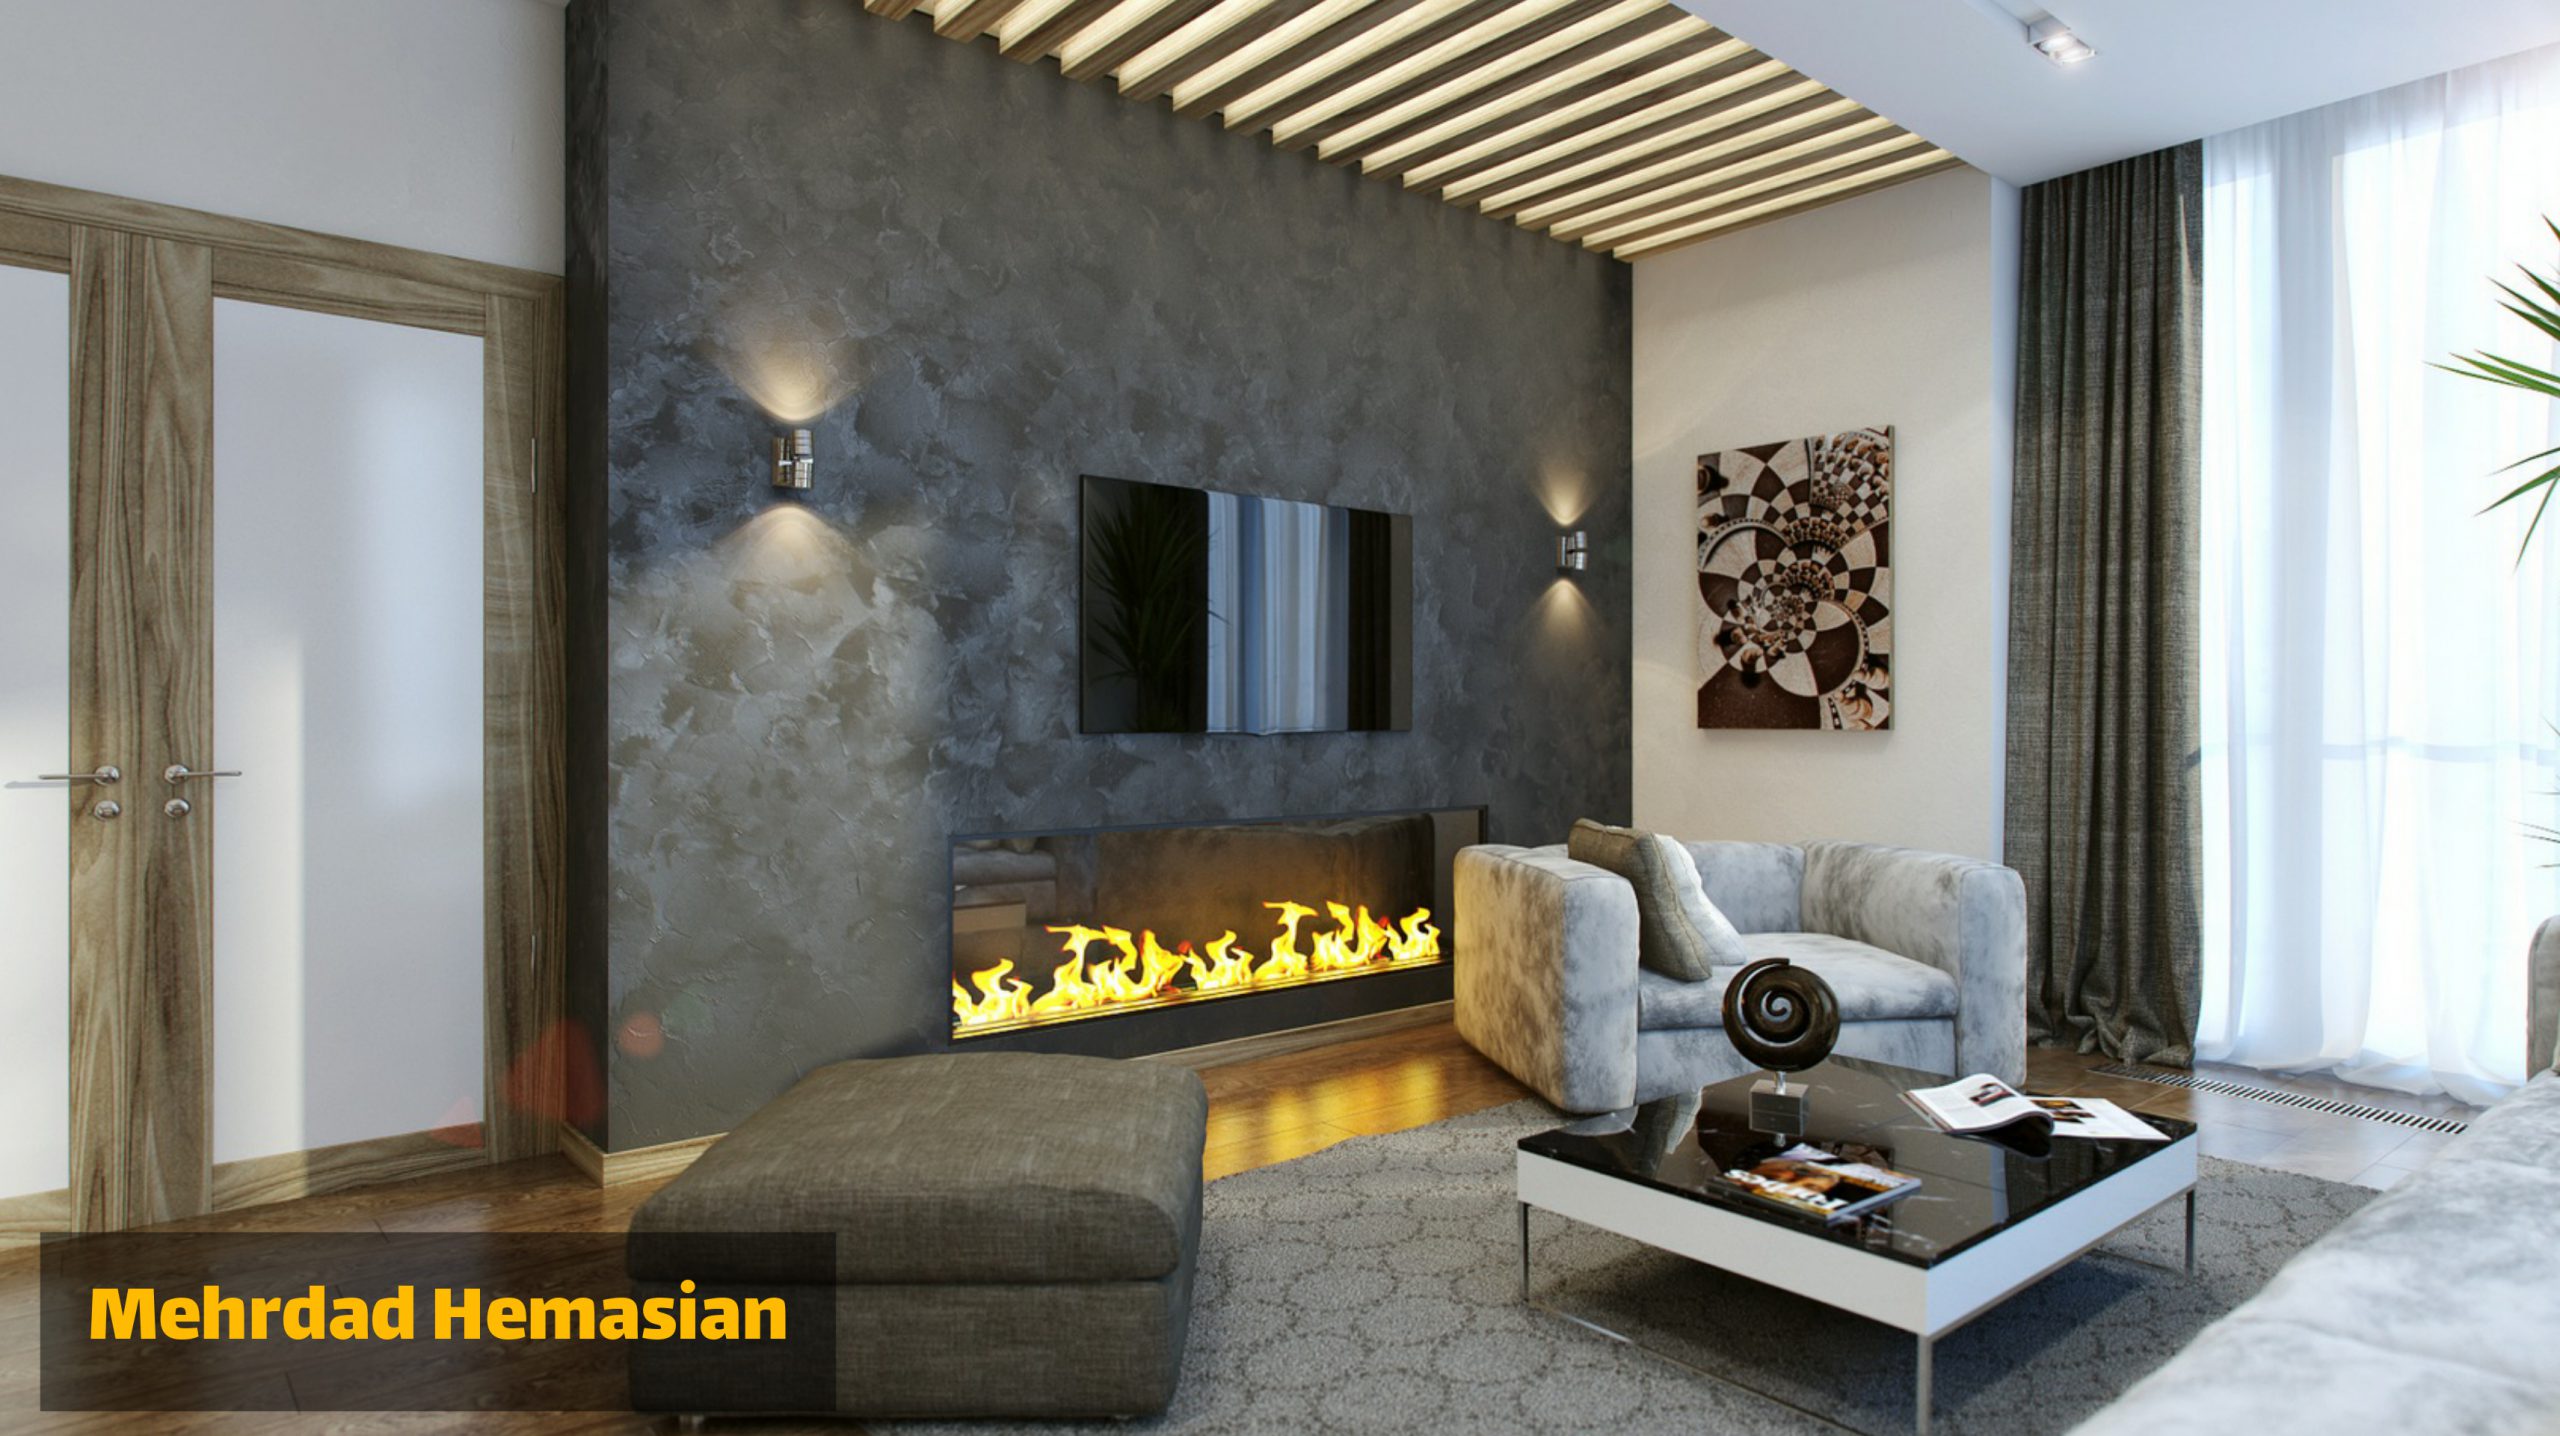 Design and implementation of interior decoration